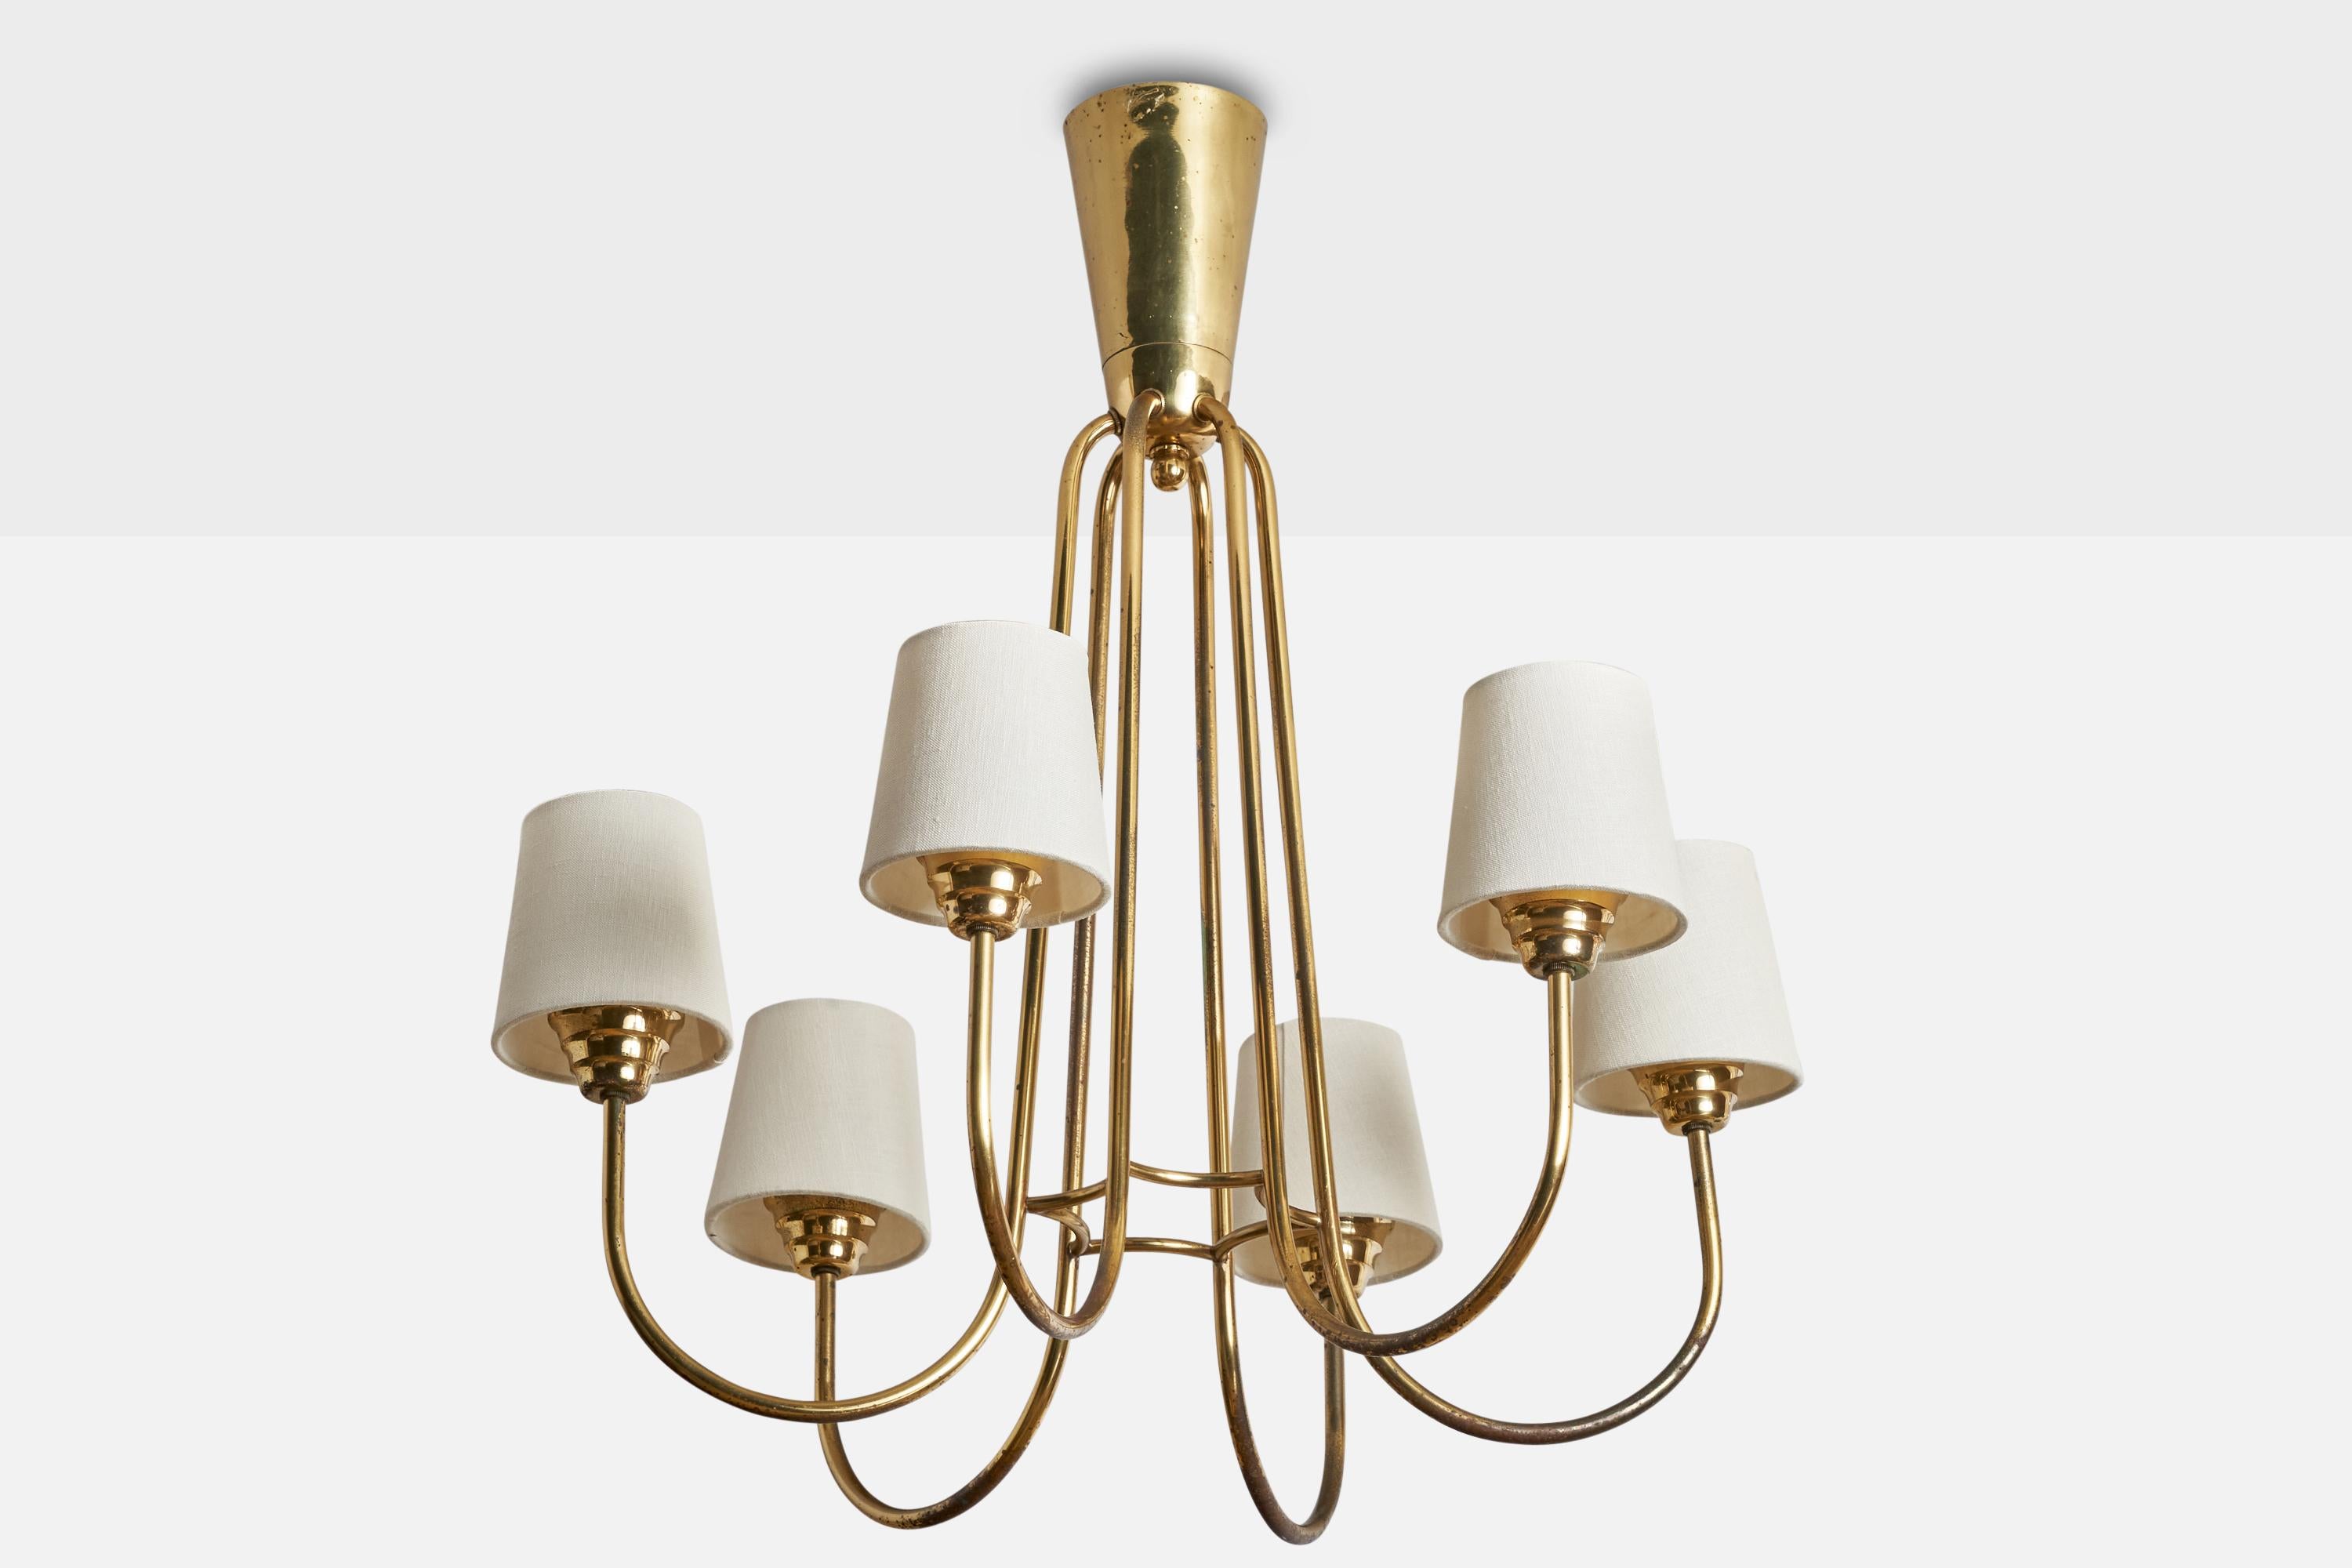 A brass and white fabric chandelier designed and produced by ITSU, Finland, c. 1940s

Dimensions of canopy (inches): 3.75”  H x 4.25” Diameter
Socket takes standard E-26 bulbs. 6 sockets.There is no maximum wattage stated on the fixture. All